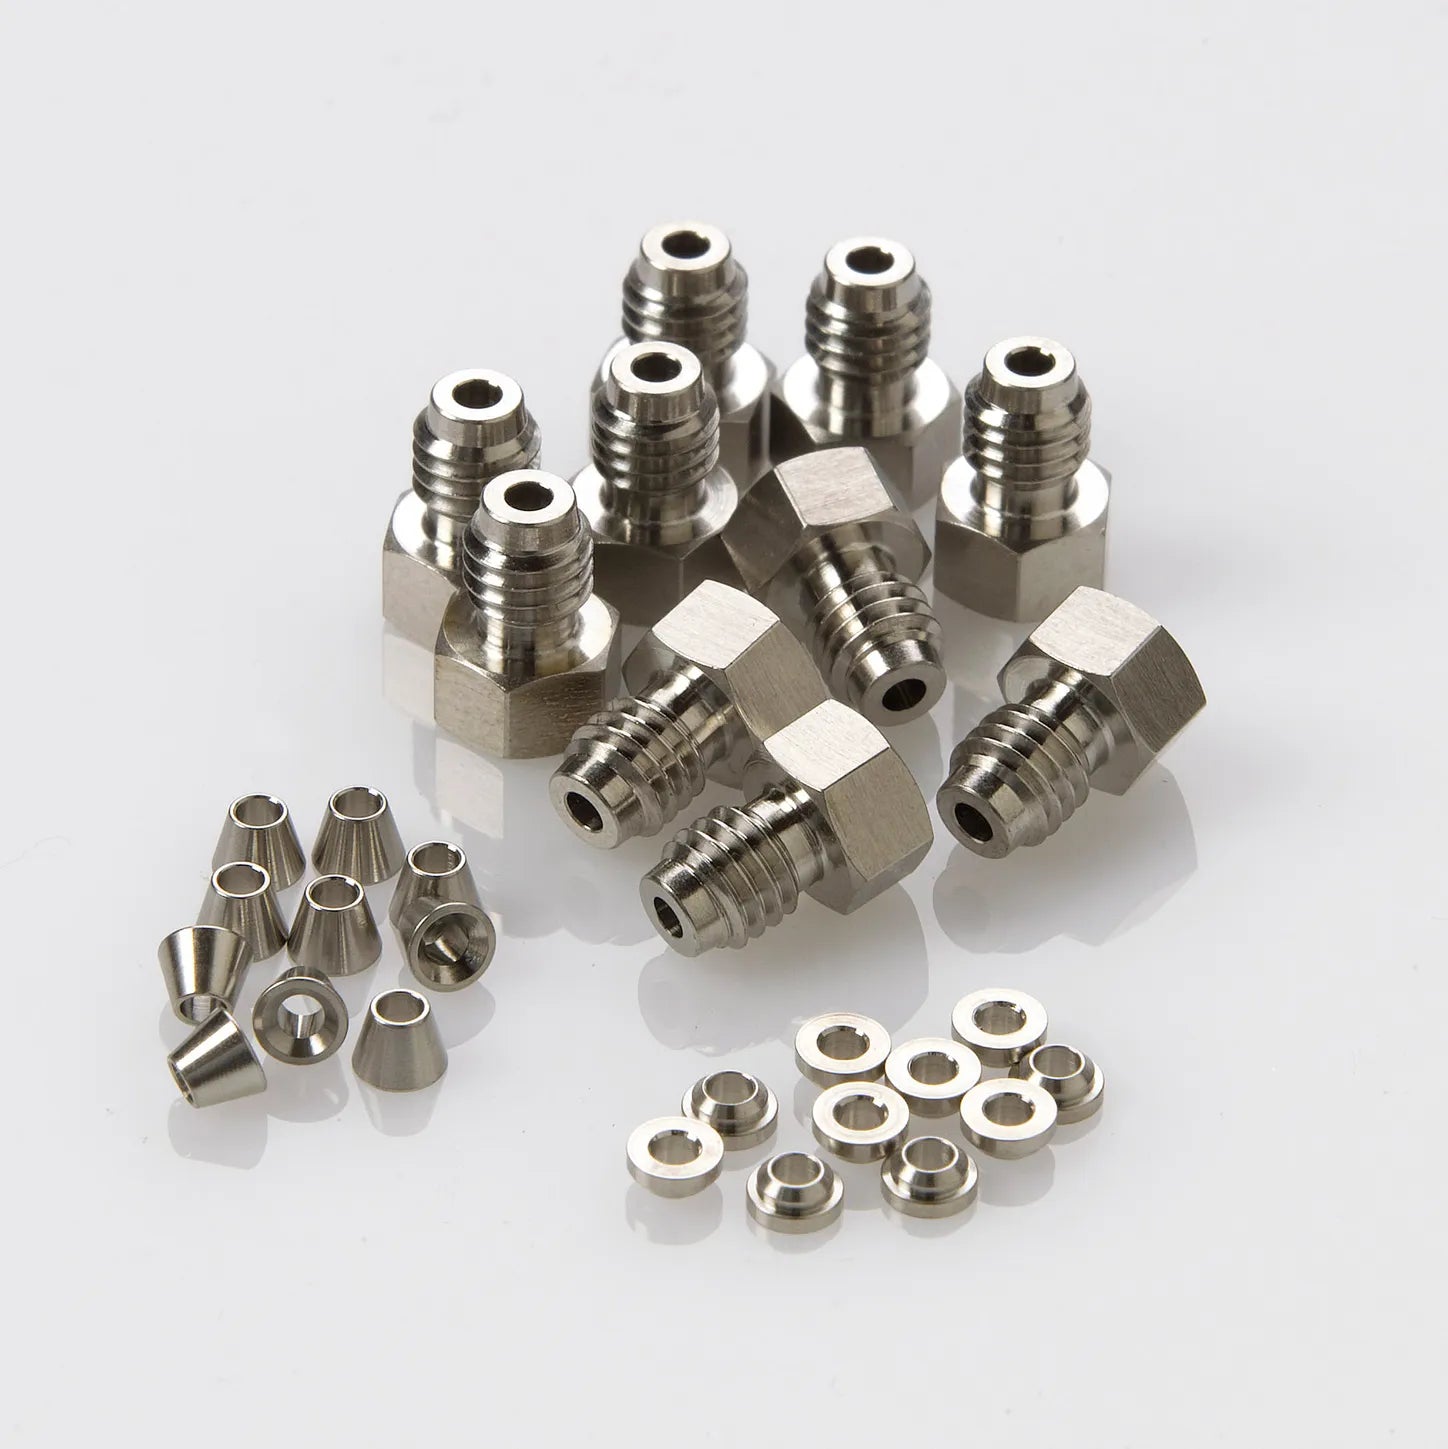 Swagelok Style Compression Fitting Kit, 10/pk Comparable to Agilent # 5062-2418